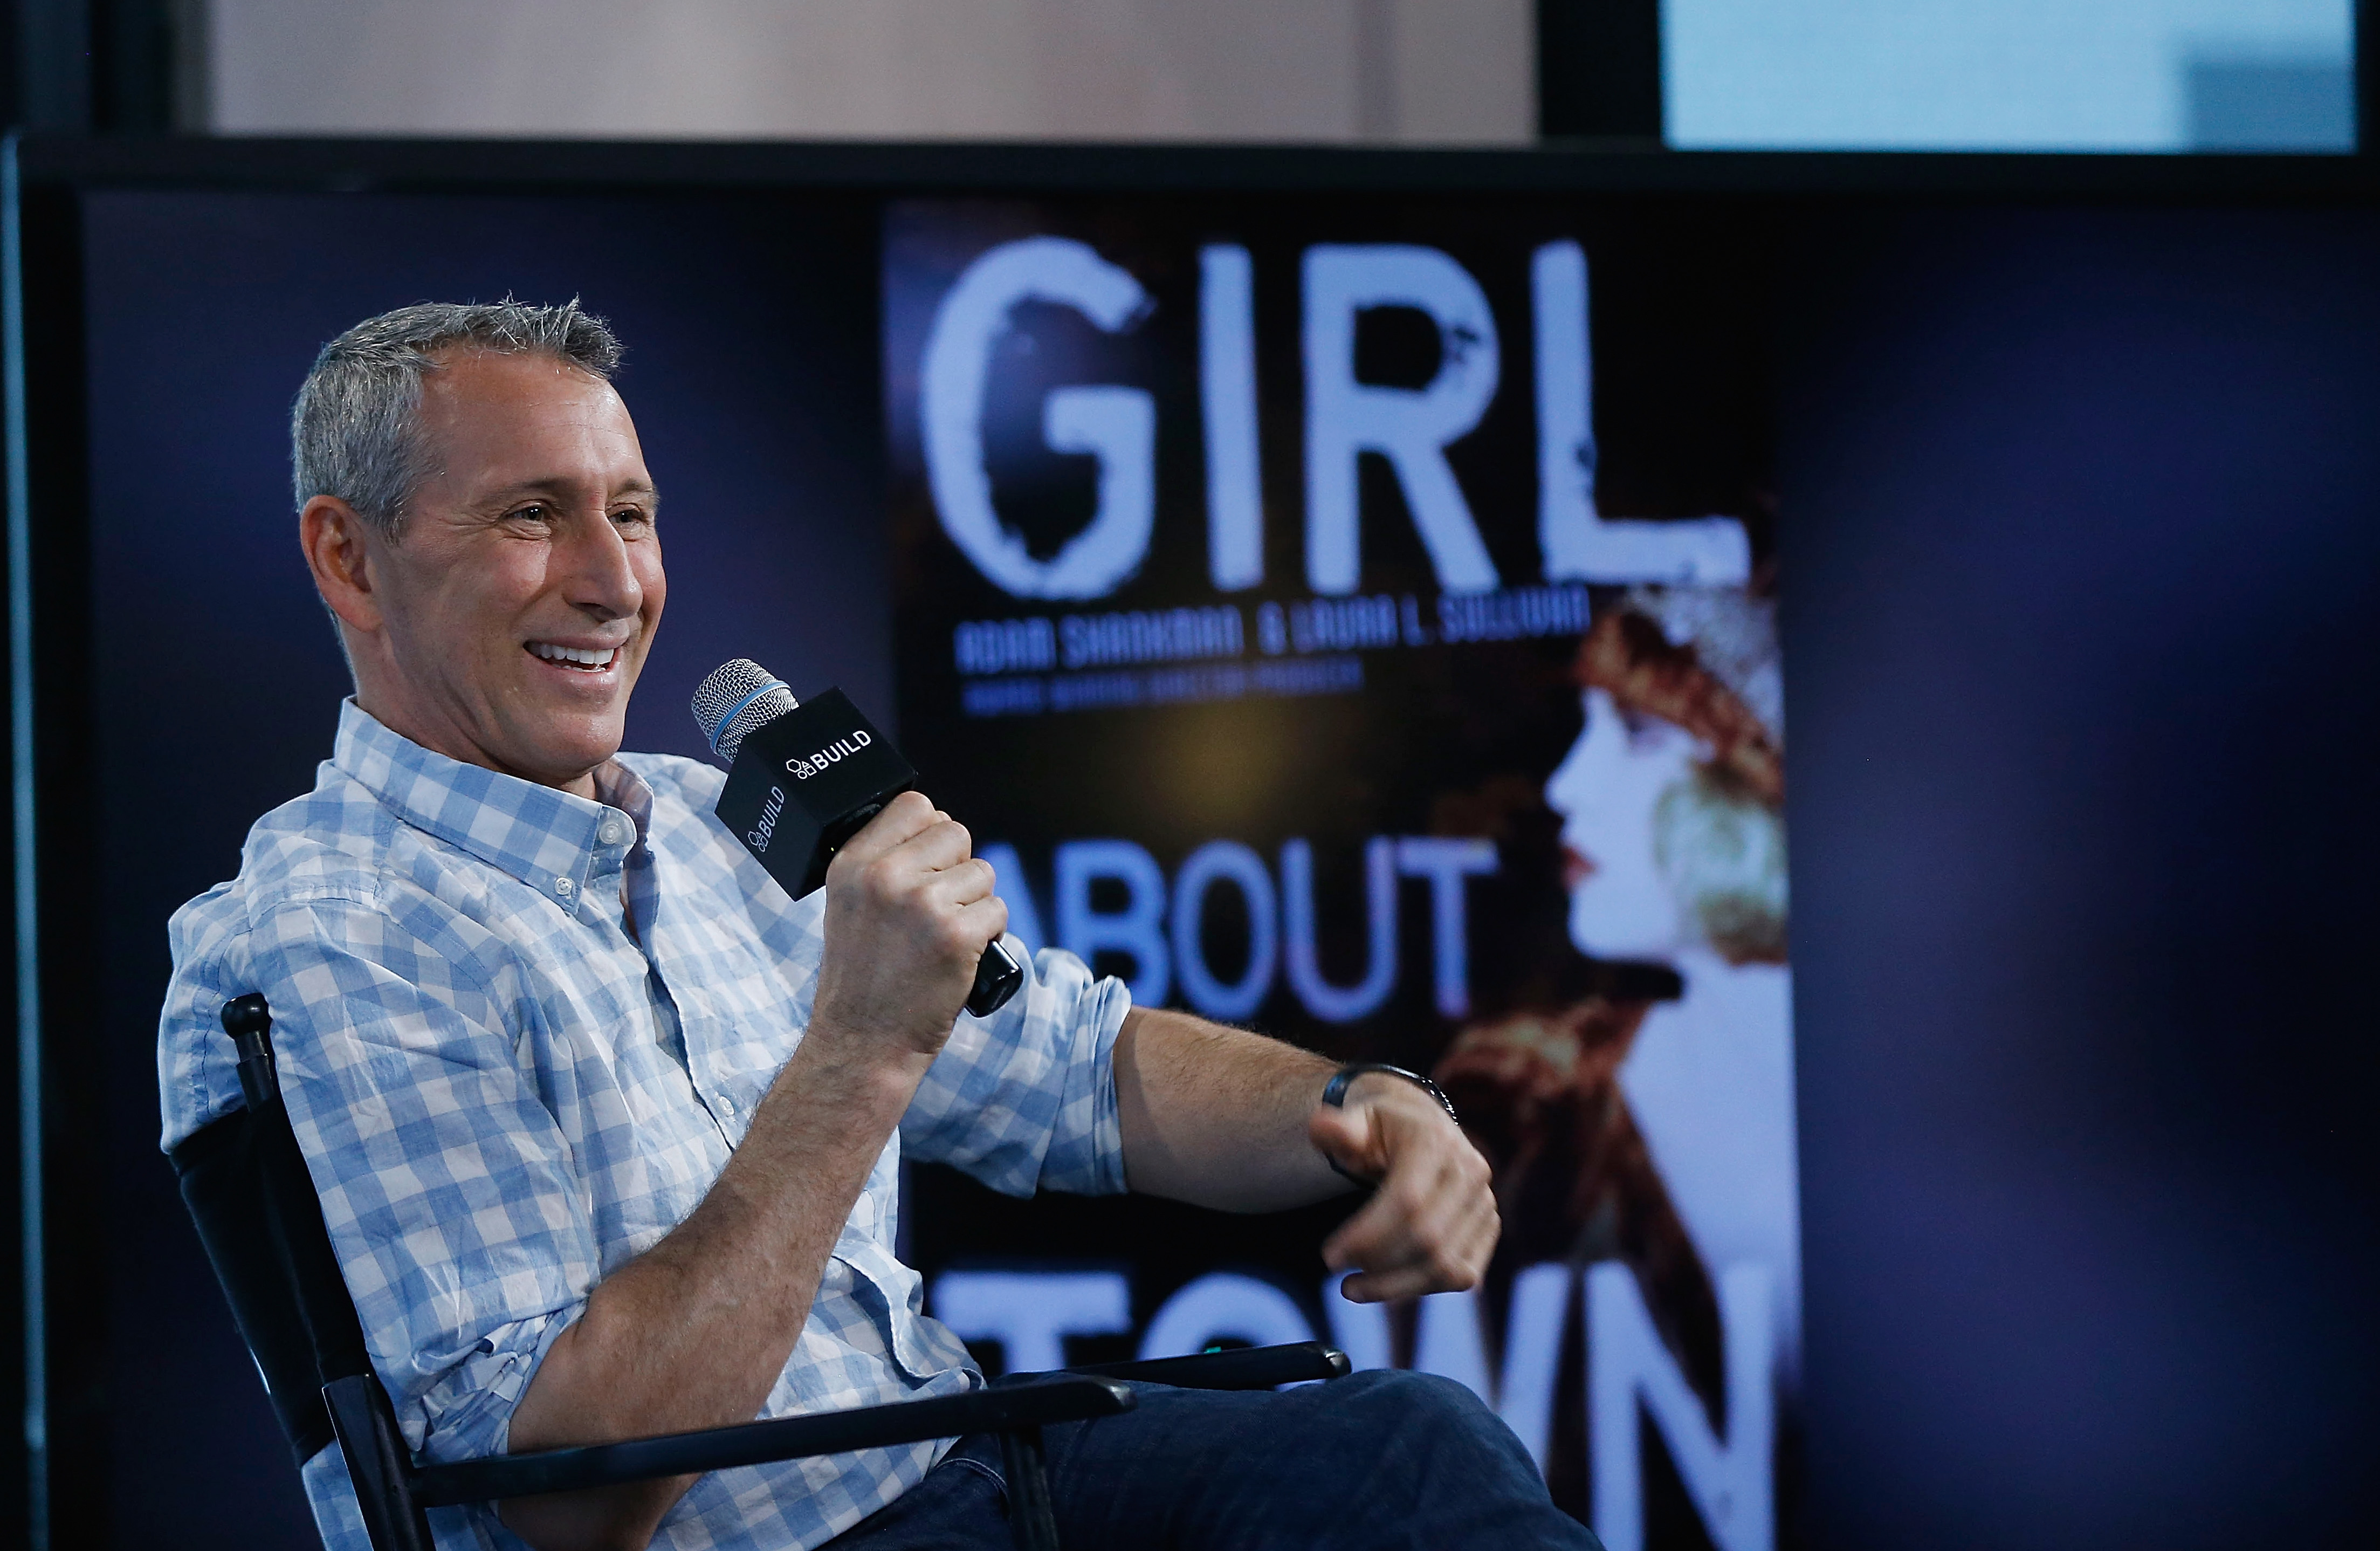 Adam Shankman of "Girl About Town" attends AOL Build Speaker Series at AOL Studios In New York on March 24, 2016 in New York City. (John Lamparski&mdash;WireImage/Getty Images)